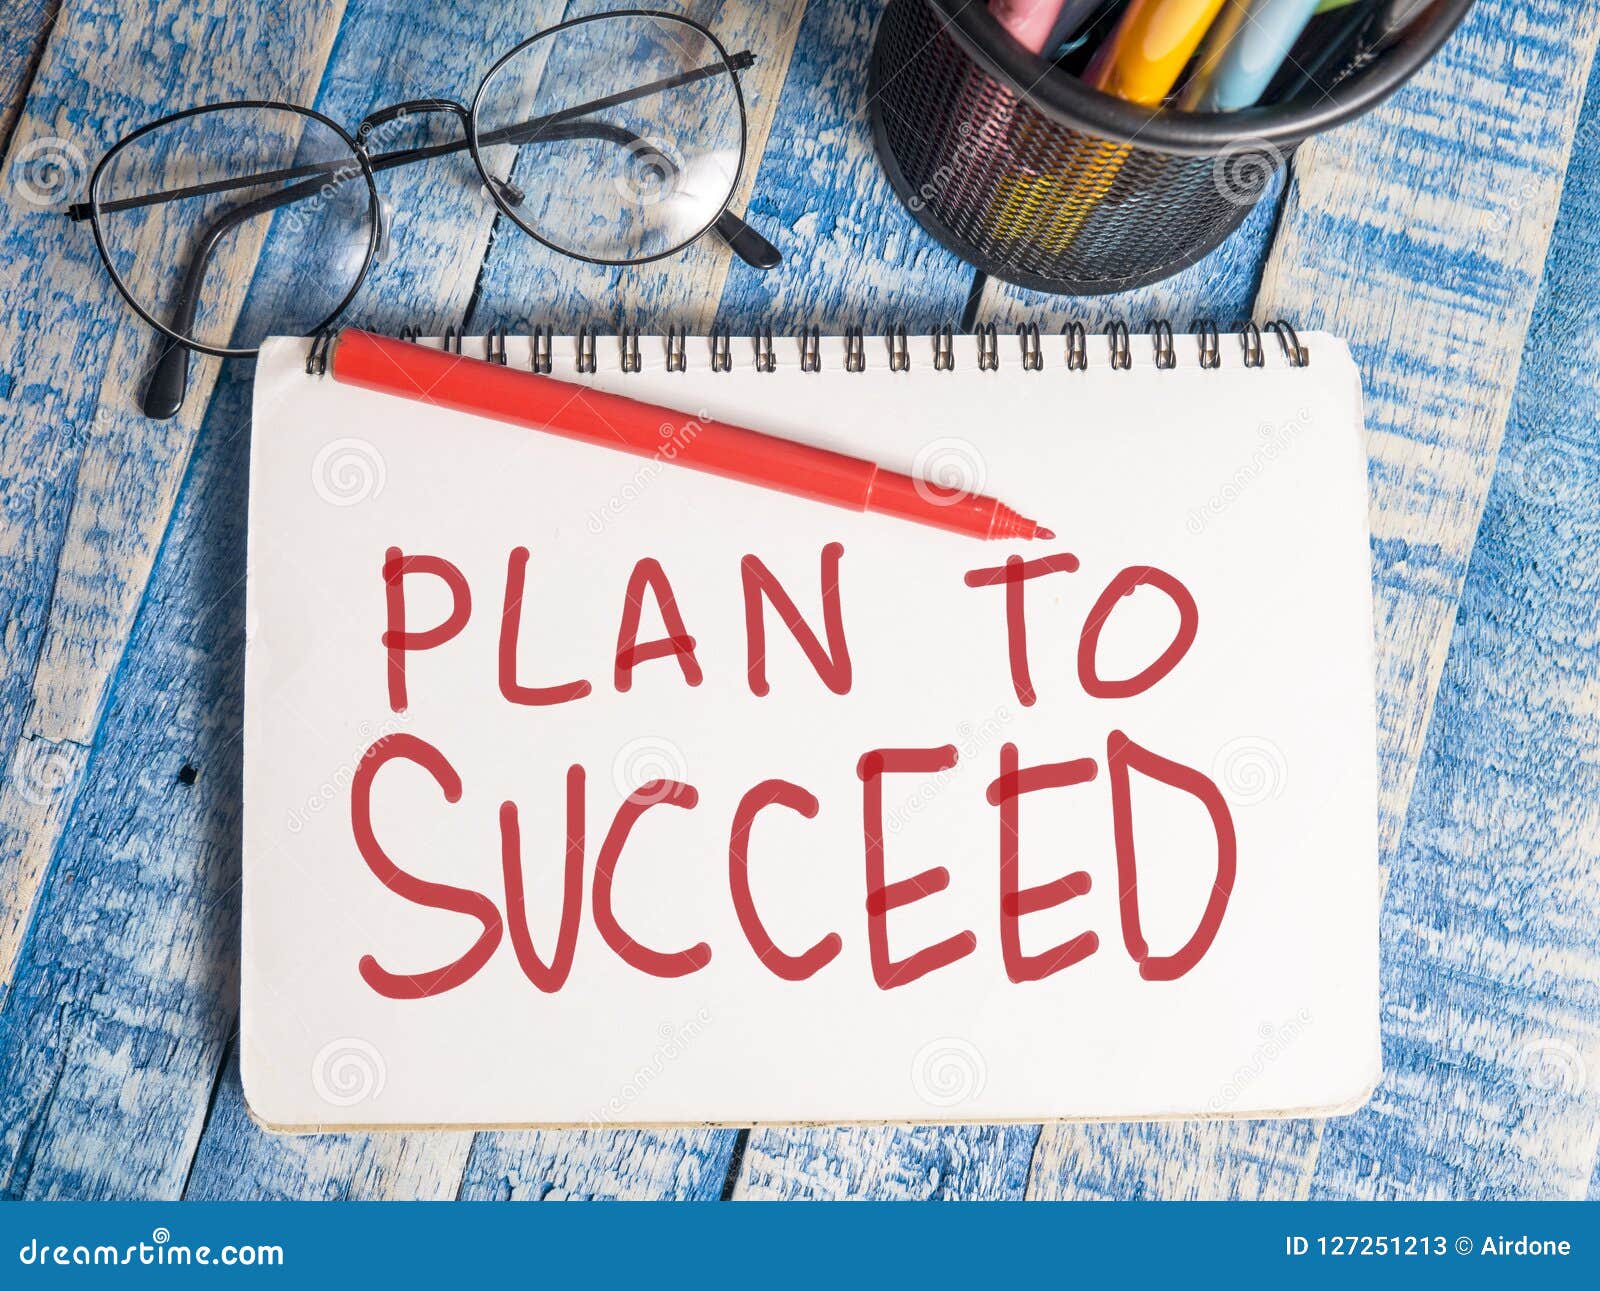 Plan To Succeed, Motivational Words Quotes Concept Stock Image Image